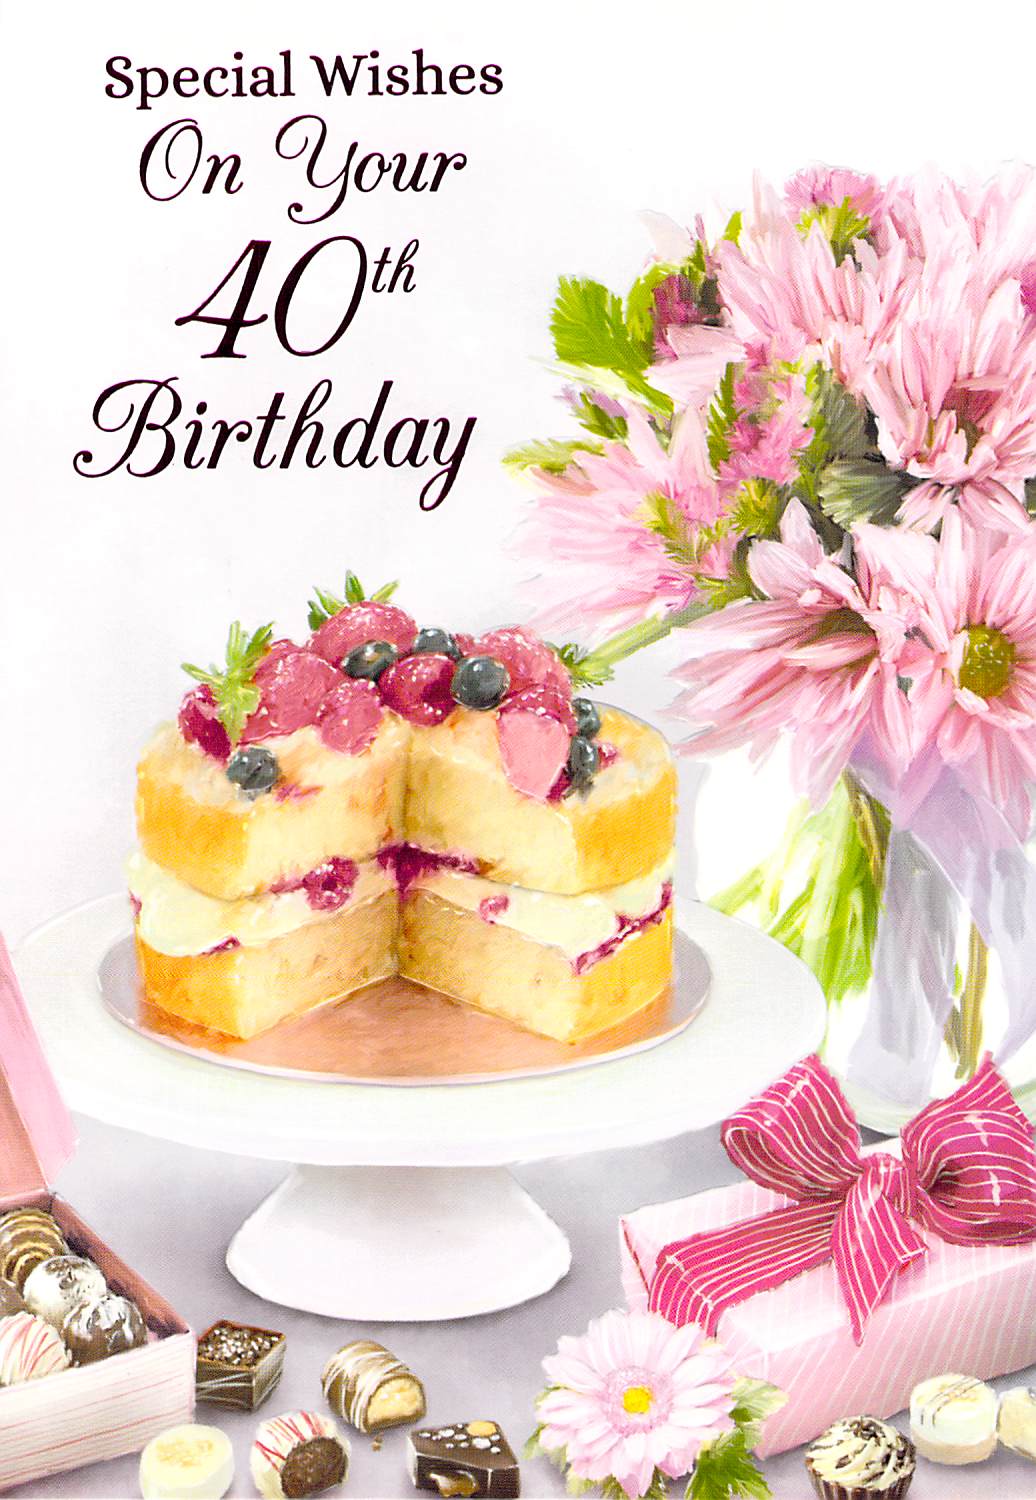 Age 40 - 40th Birthday - Greeting Card - Cake / Flowers – Made To ...